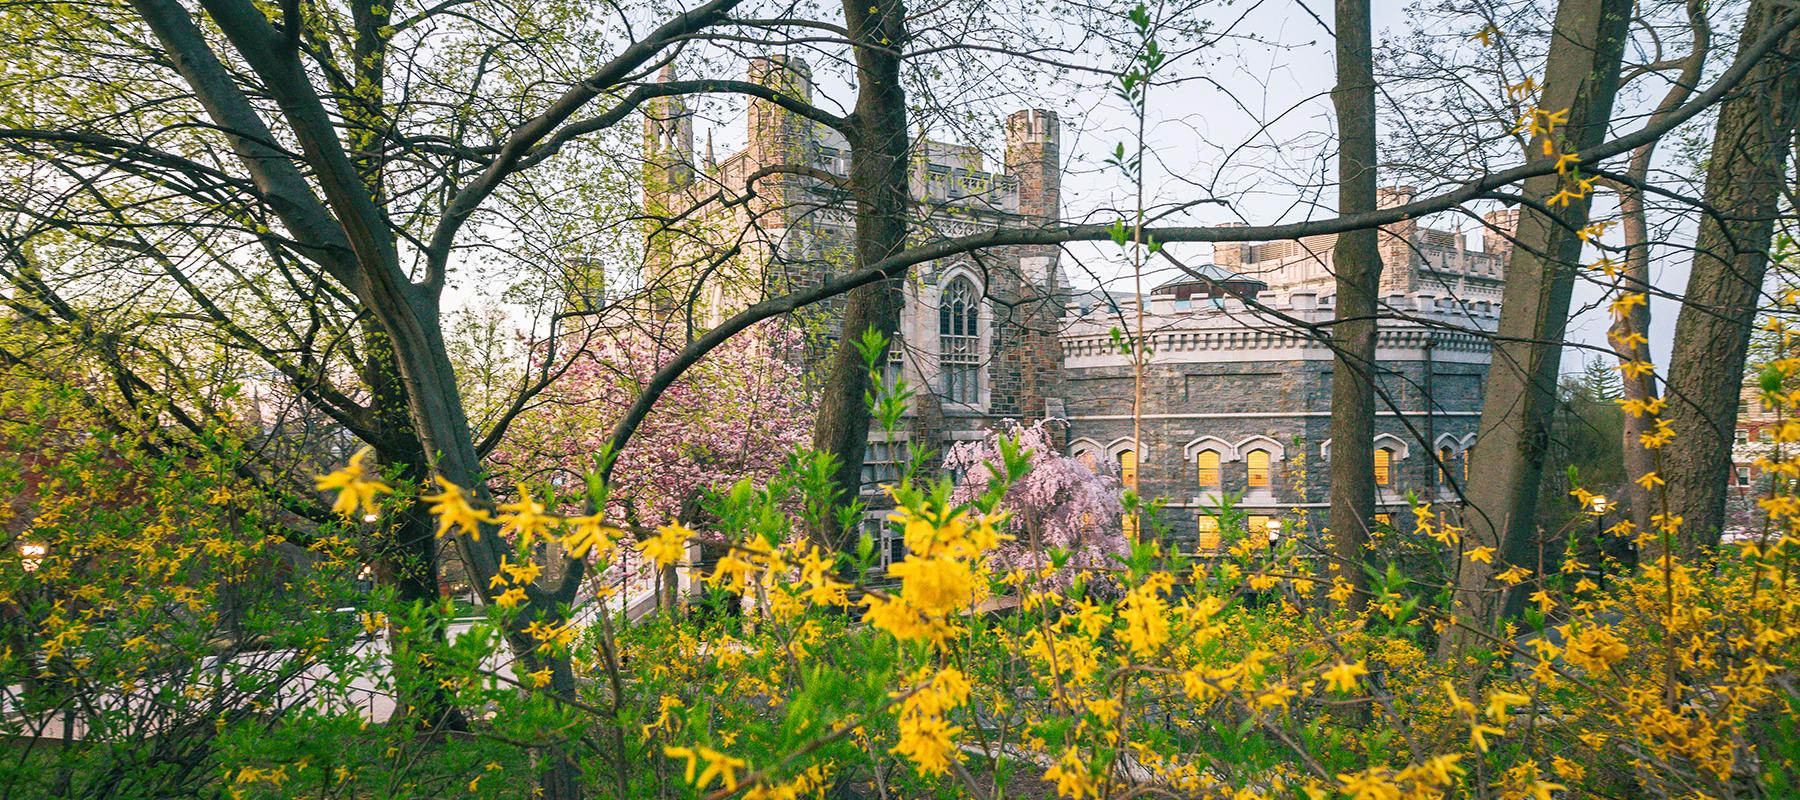 Lehigh University with spring blossoms